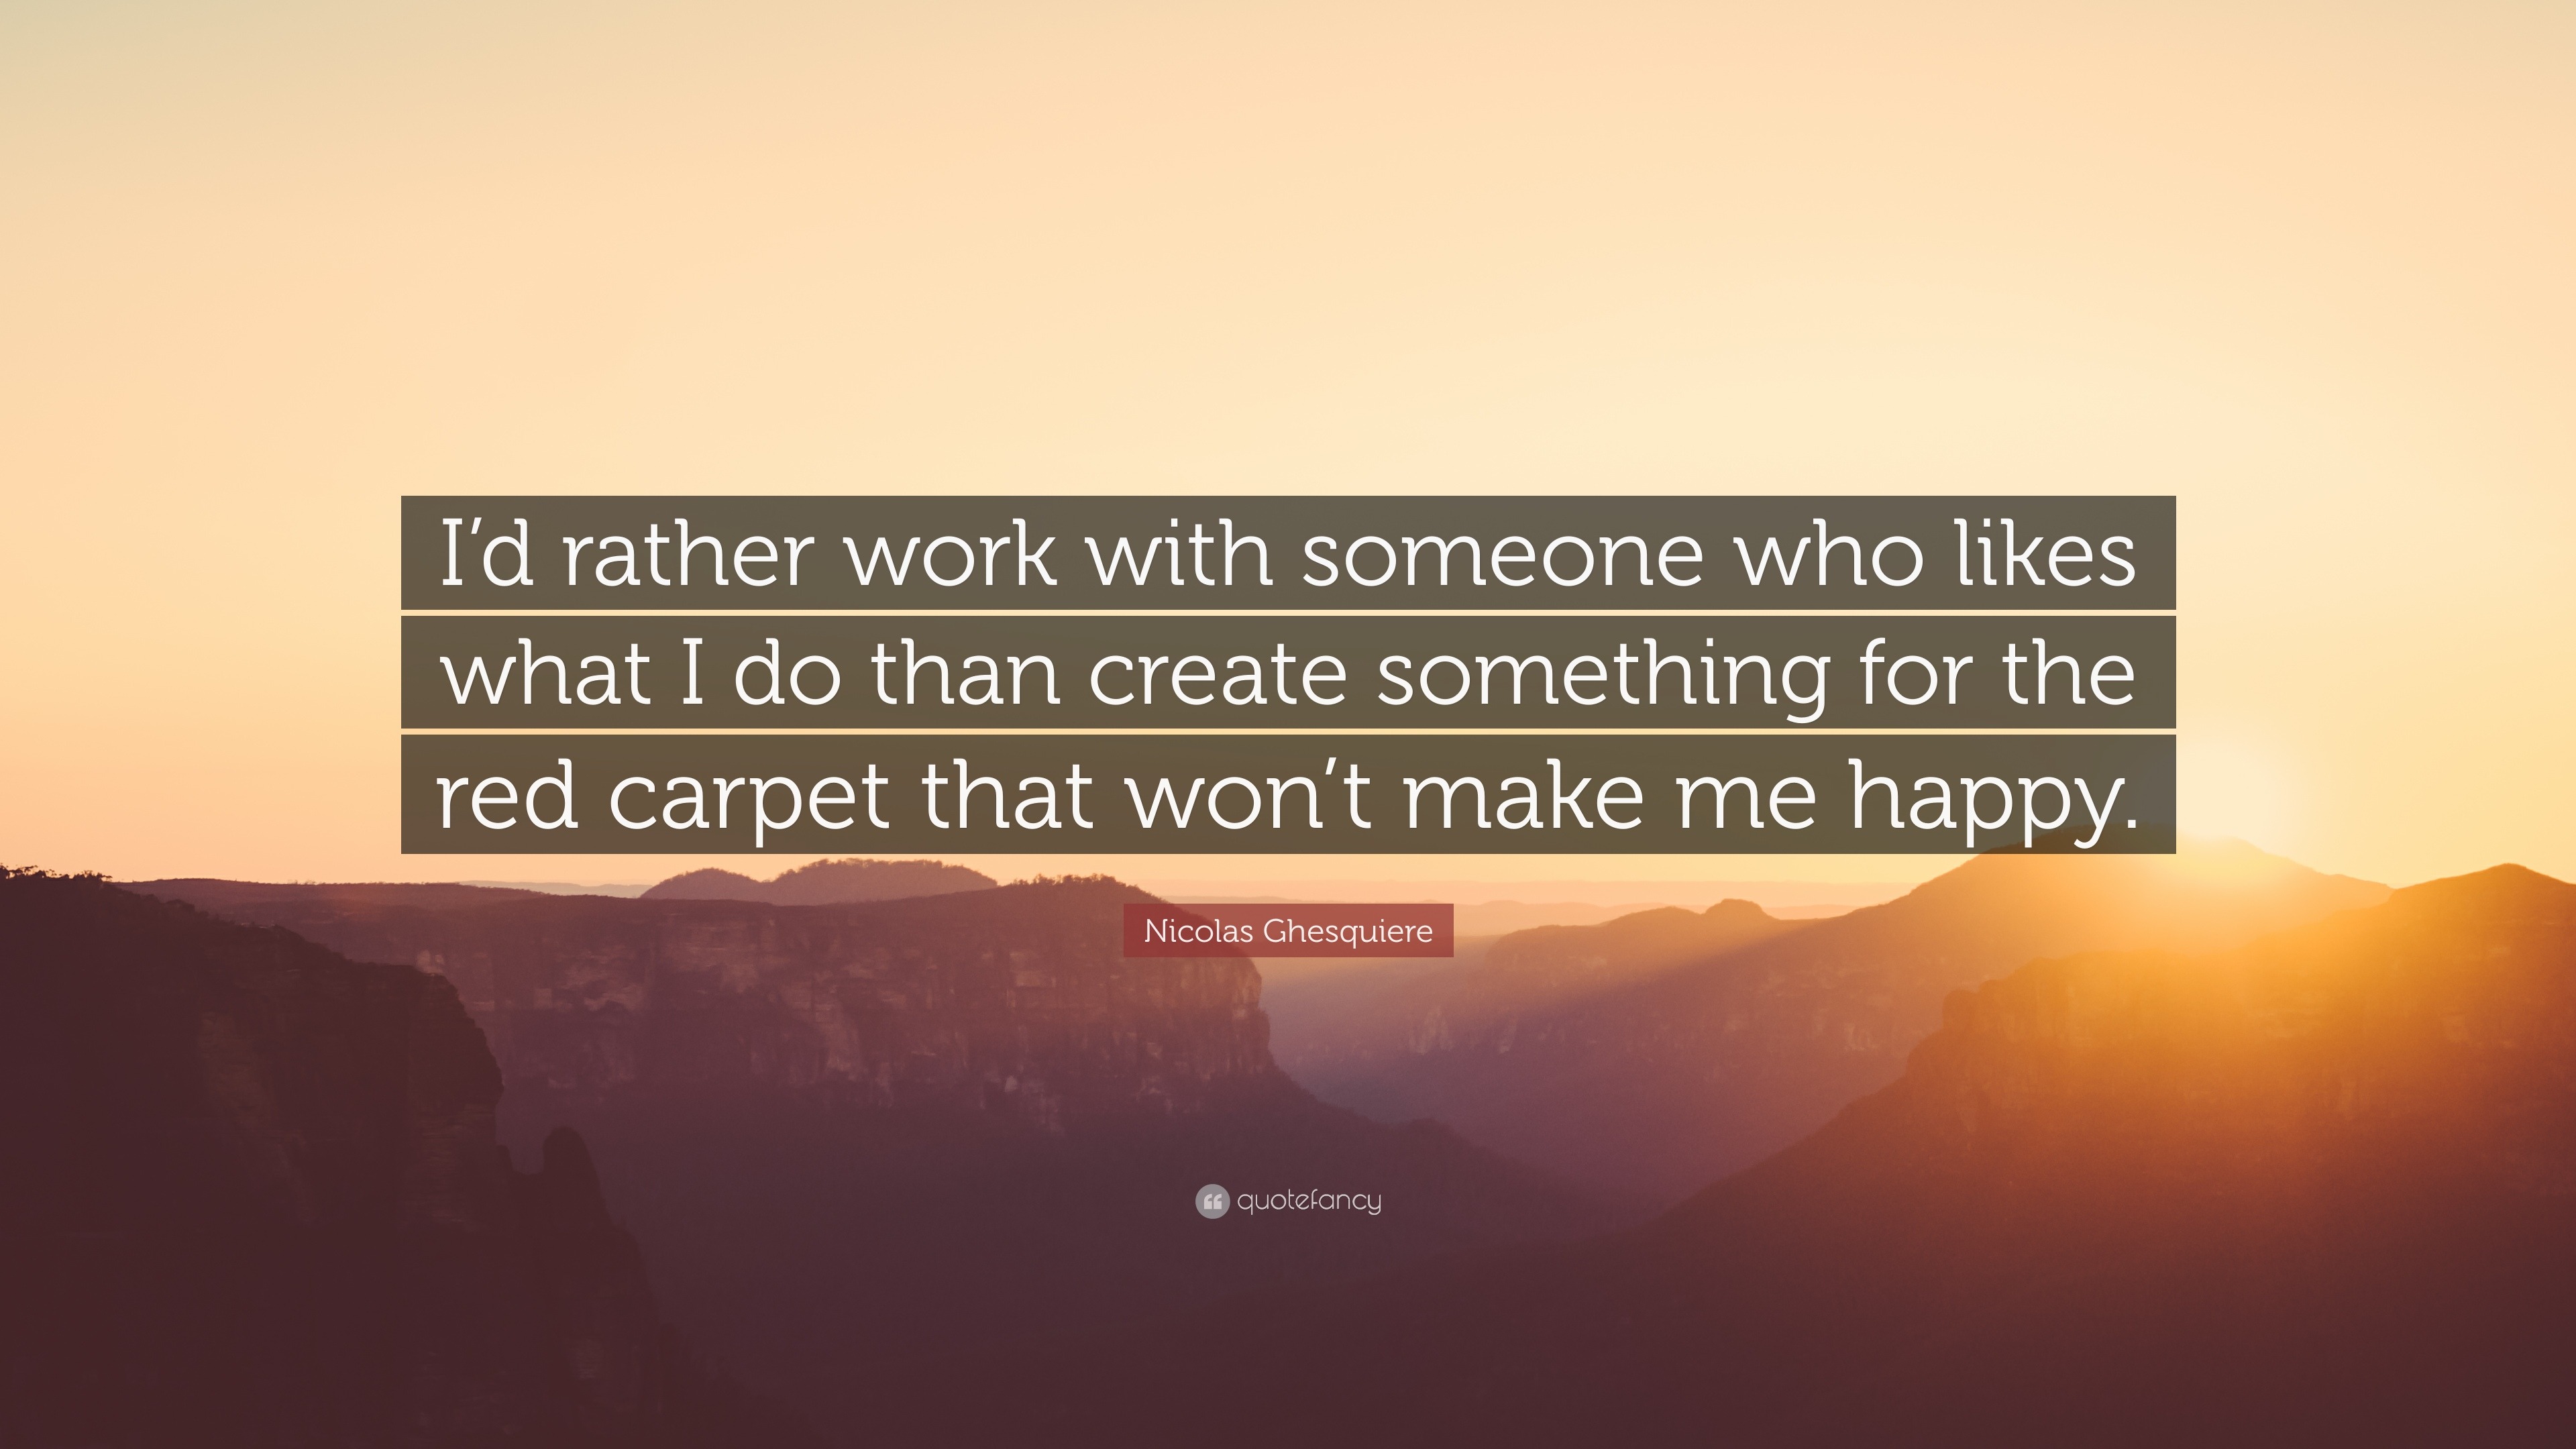 Nicolas Ghesquiere Quote: “I'd rather work with someone who likes